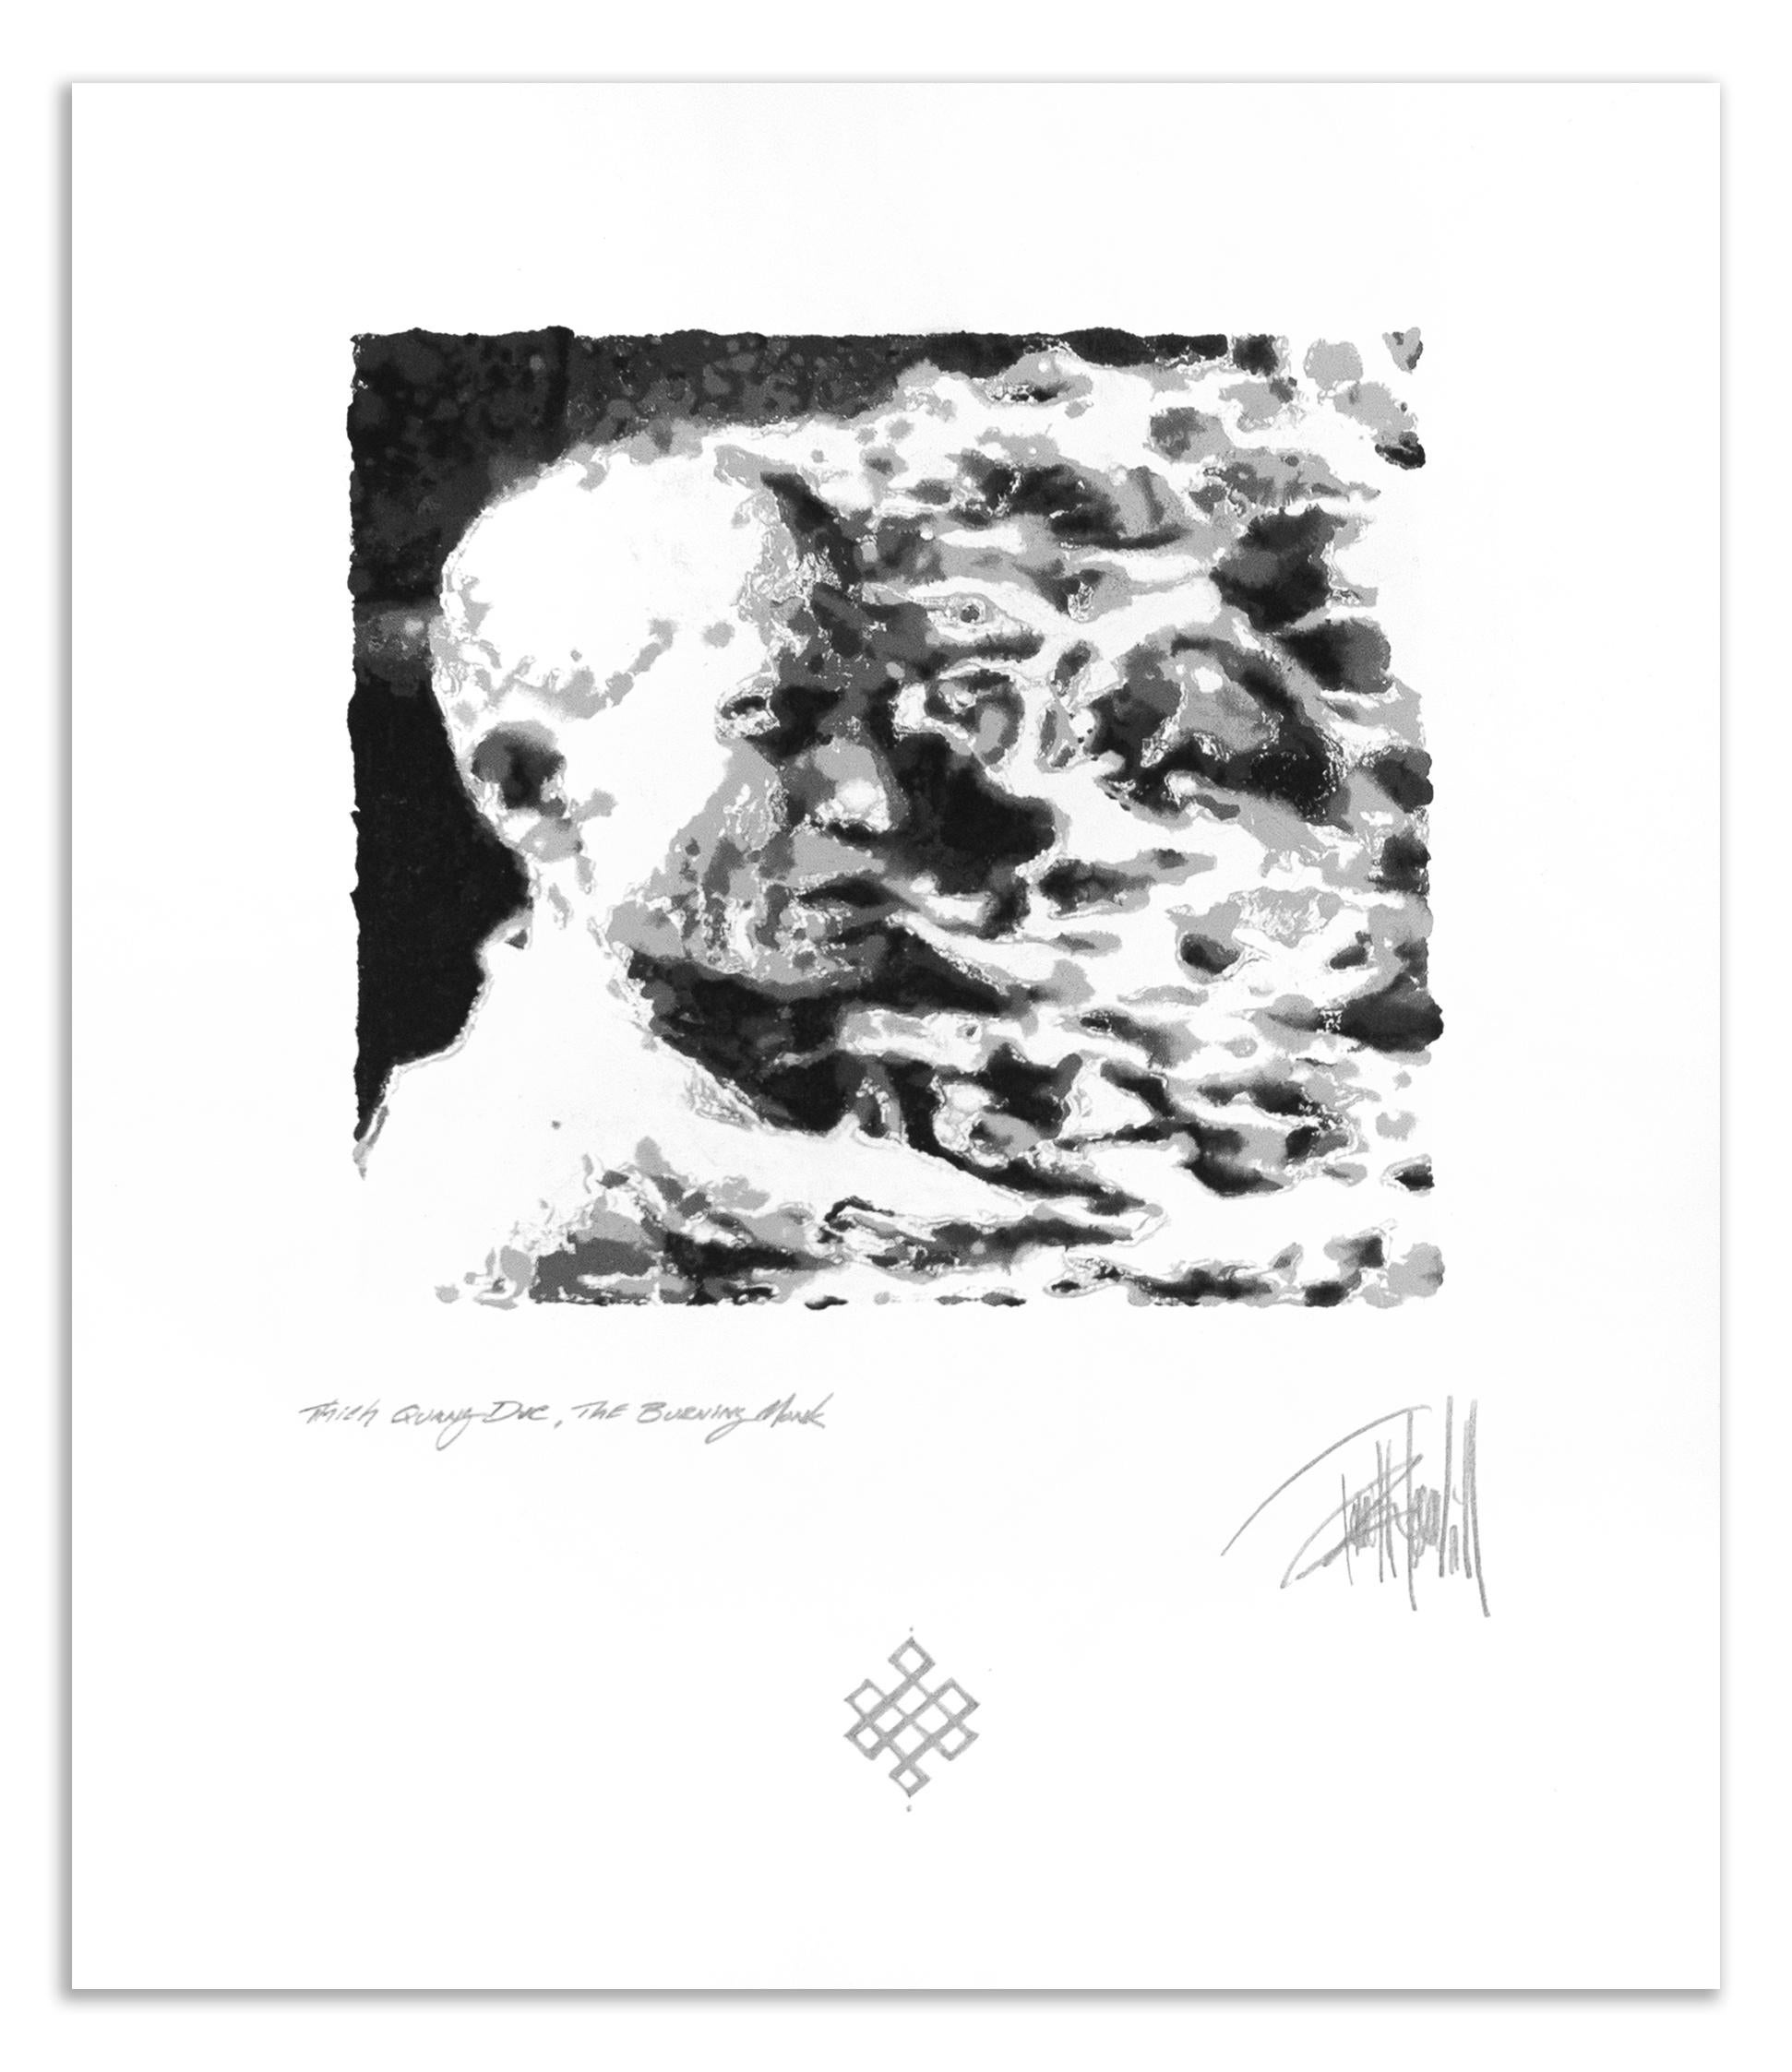 Terrell Thornhill  Figurative Print - Thich Quang Duc, the Burning Monk